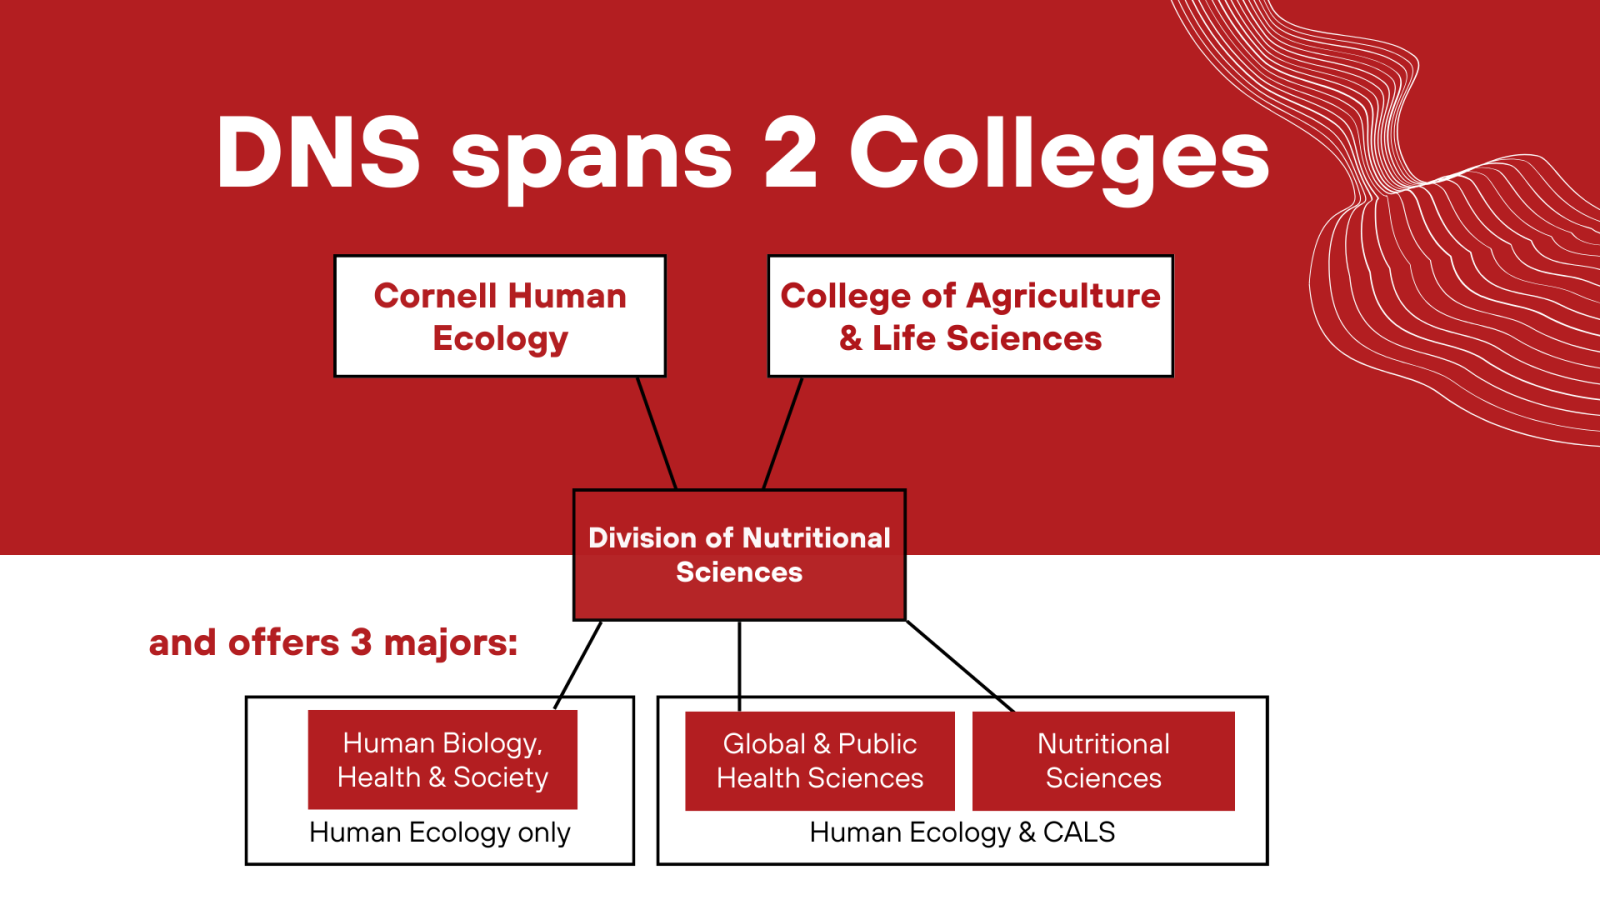 Image is a diagram showing DNS situated between two colleges, Human Ecology & CALS